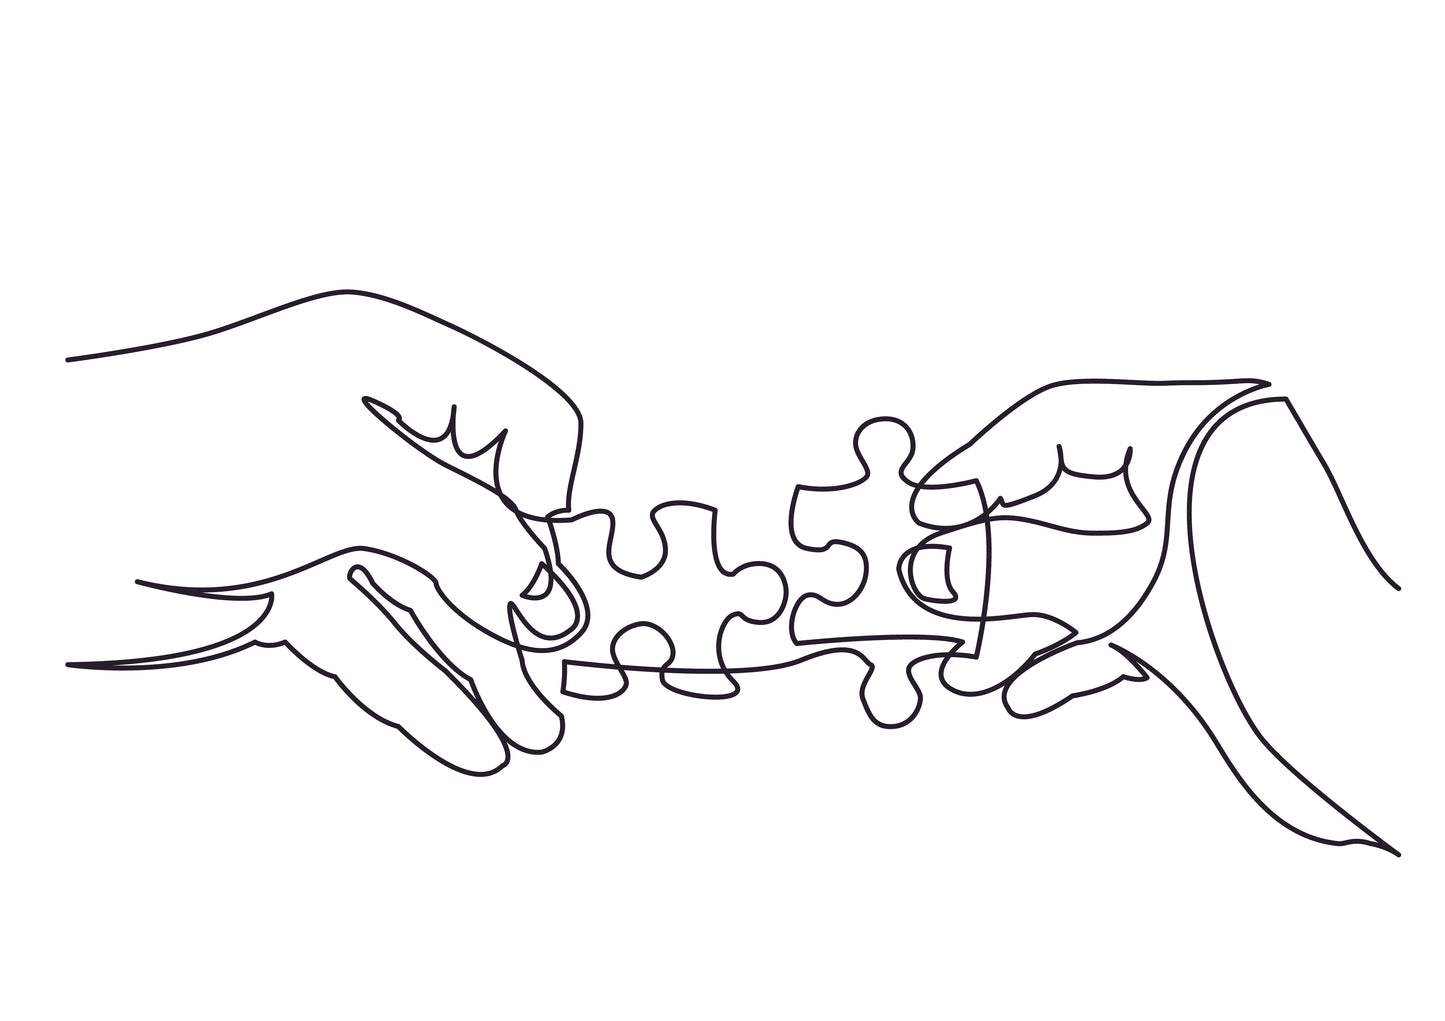 Continuous line drawing of hands solving jigsaw puzzle